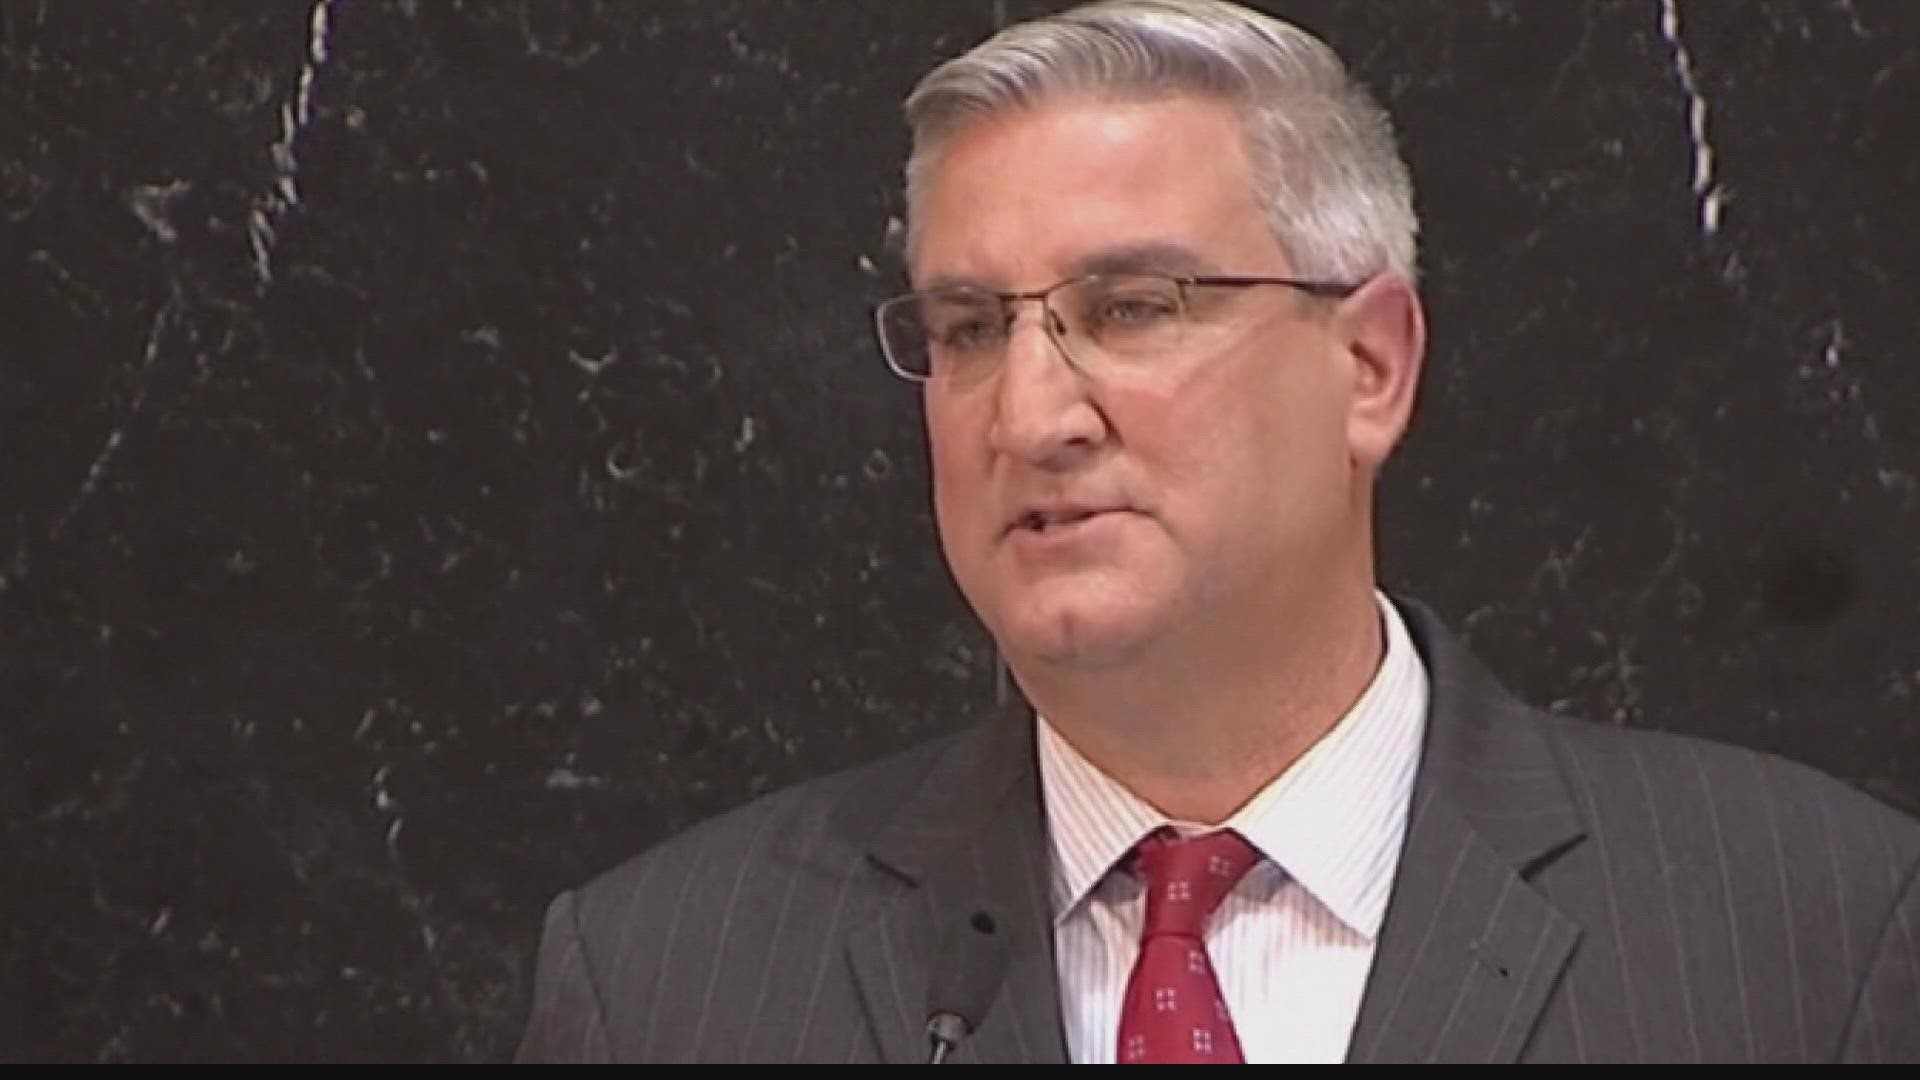 Governor Holcomb signed an executive order 2 hours ago, suspending certain regulations in order to minimize any disruption at the pump.